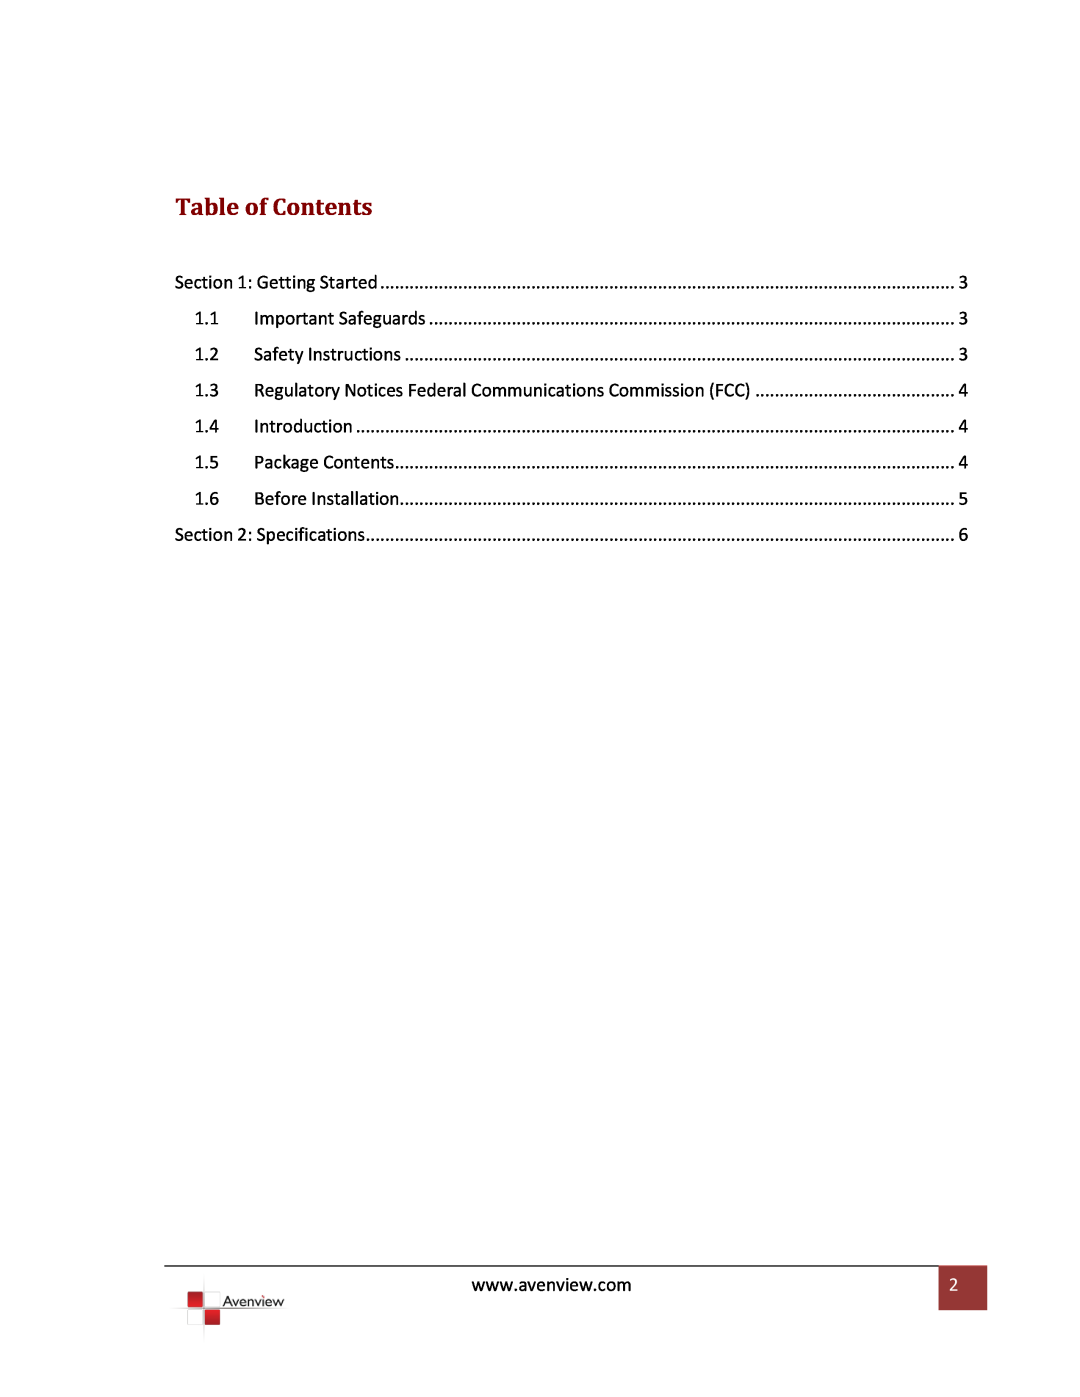 Avenview DVI-C5-M-SET specifications Table of Contents, Regulatory Notices Federal Communications Commission FCC 